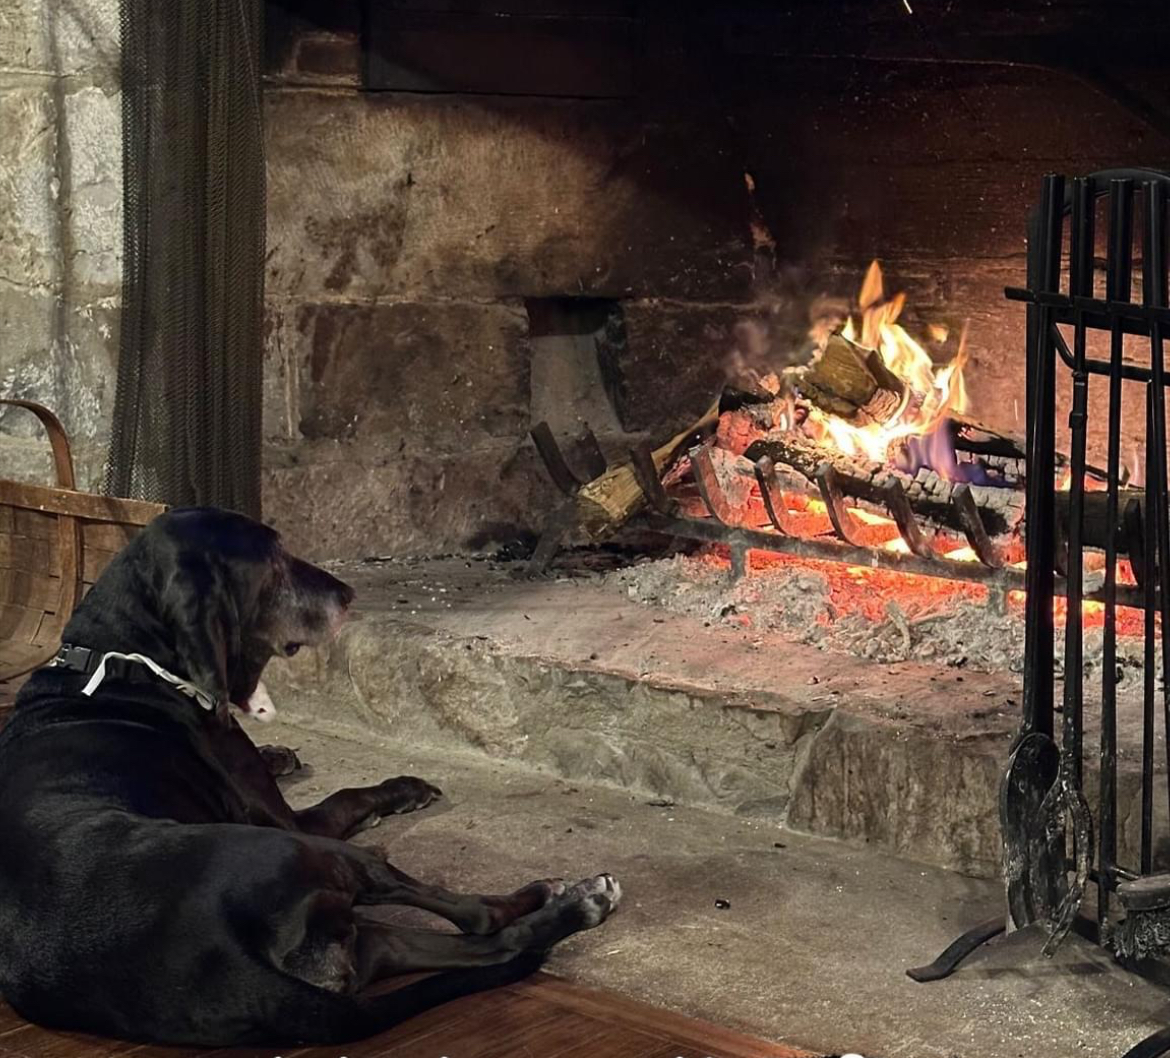 Dog at the Fireplace